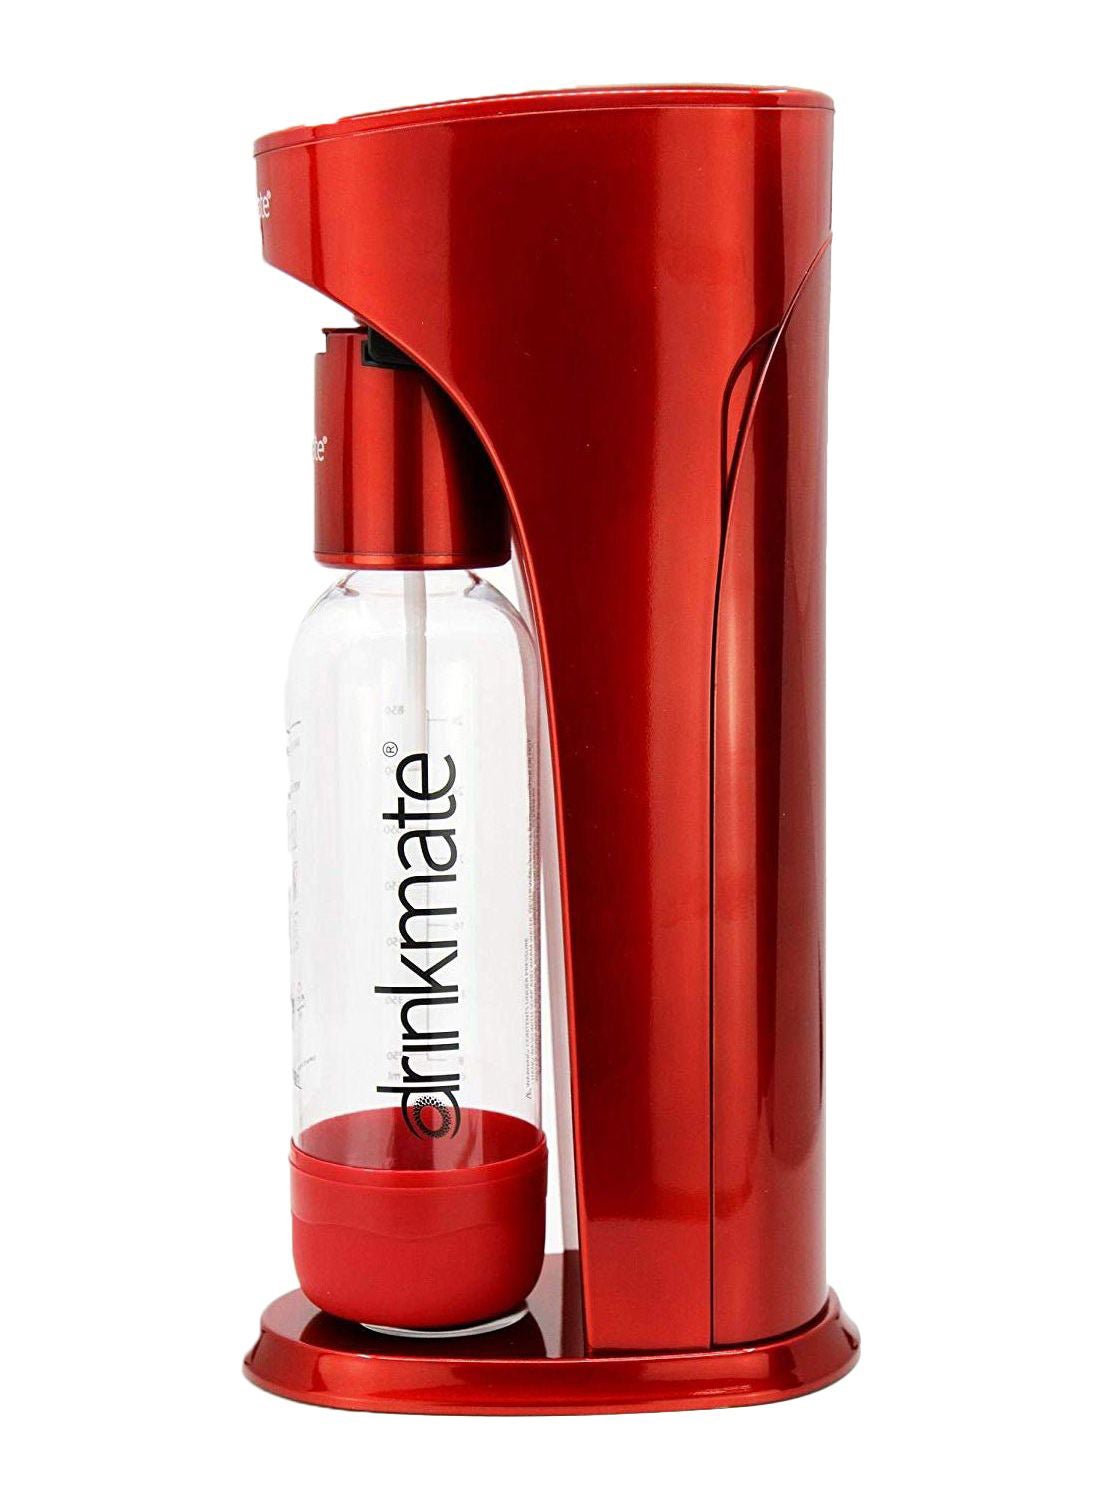 Home Soda Maker Bottle 1L BB-09R Red/Clear 